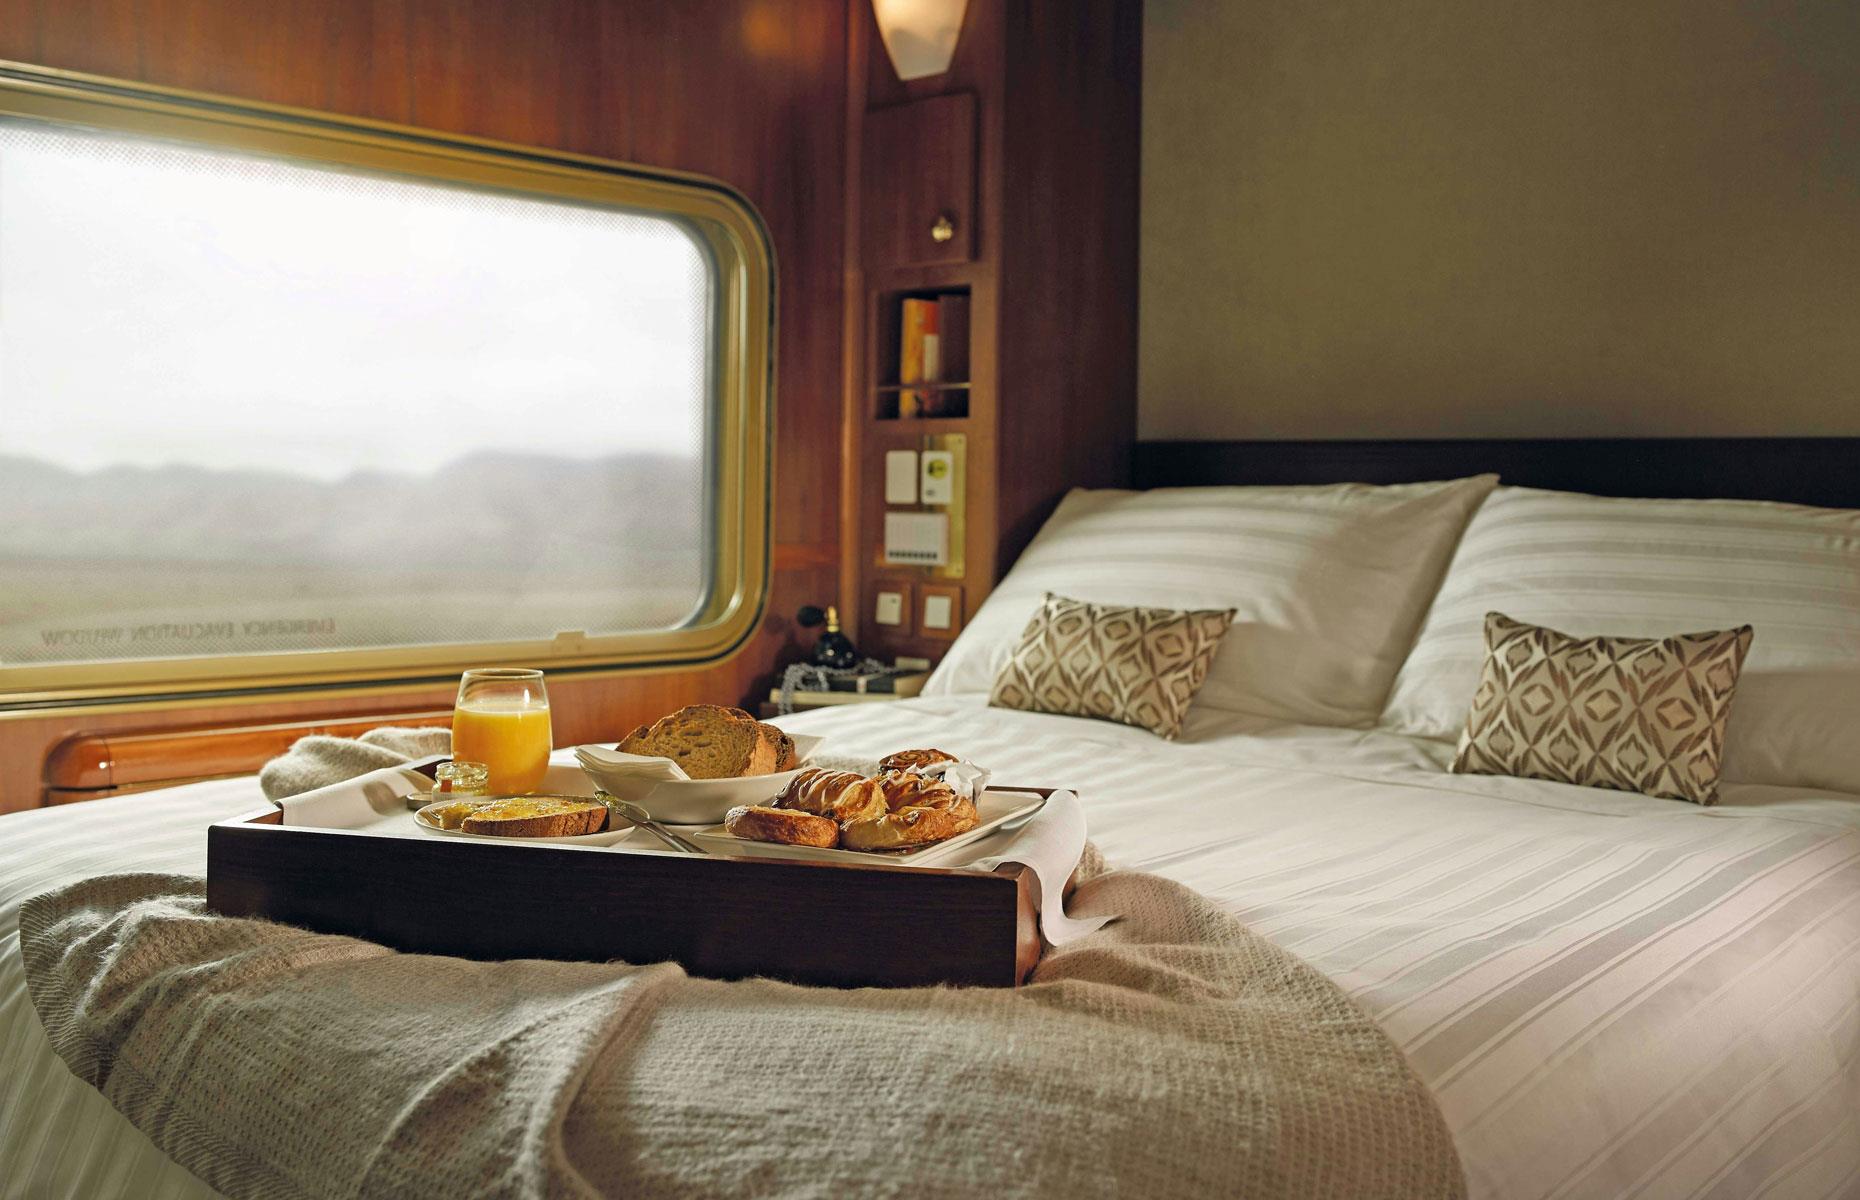 <p>Platinum passengers get dibs on the train's best ensuite cabins and have access to the Platinum Club, an exclusive bar carriage. There, they can sip on Bollinger champagne to their hearts' content and enjoy gourmet meals in the Art Deco-style Queen Adelaide Restaurant.</p>  <p>The Platinum fare includes several excursions, including a "spectacular dinner under the stars" in Alice Springs and a tour of the subterranean opal mining town of Coober Pedy.</p>